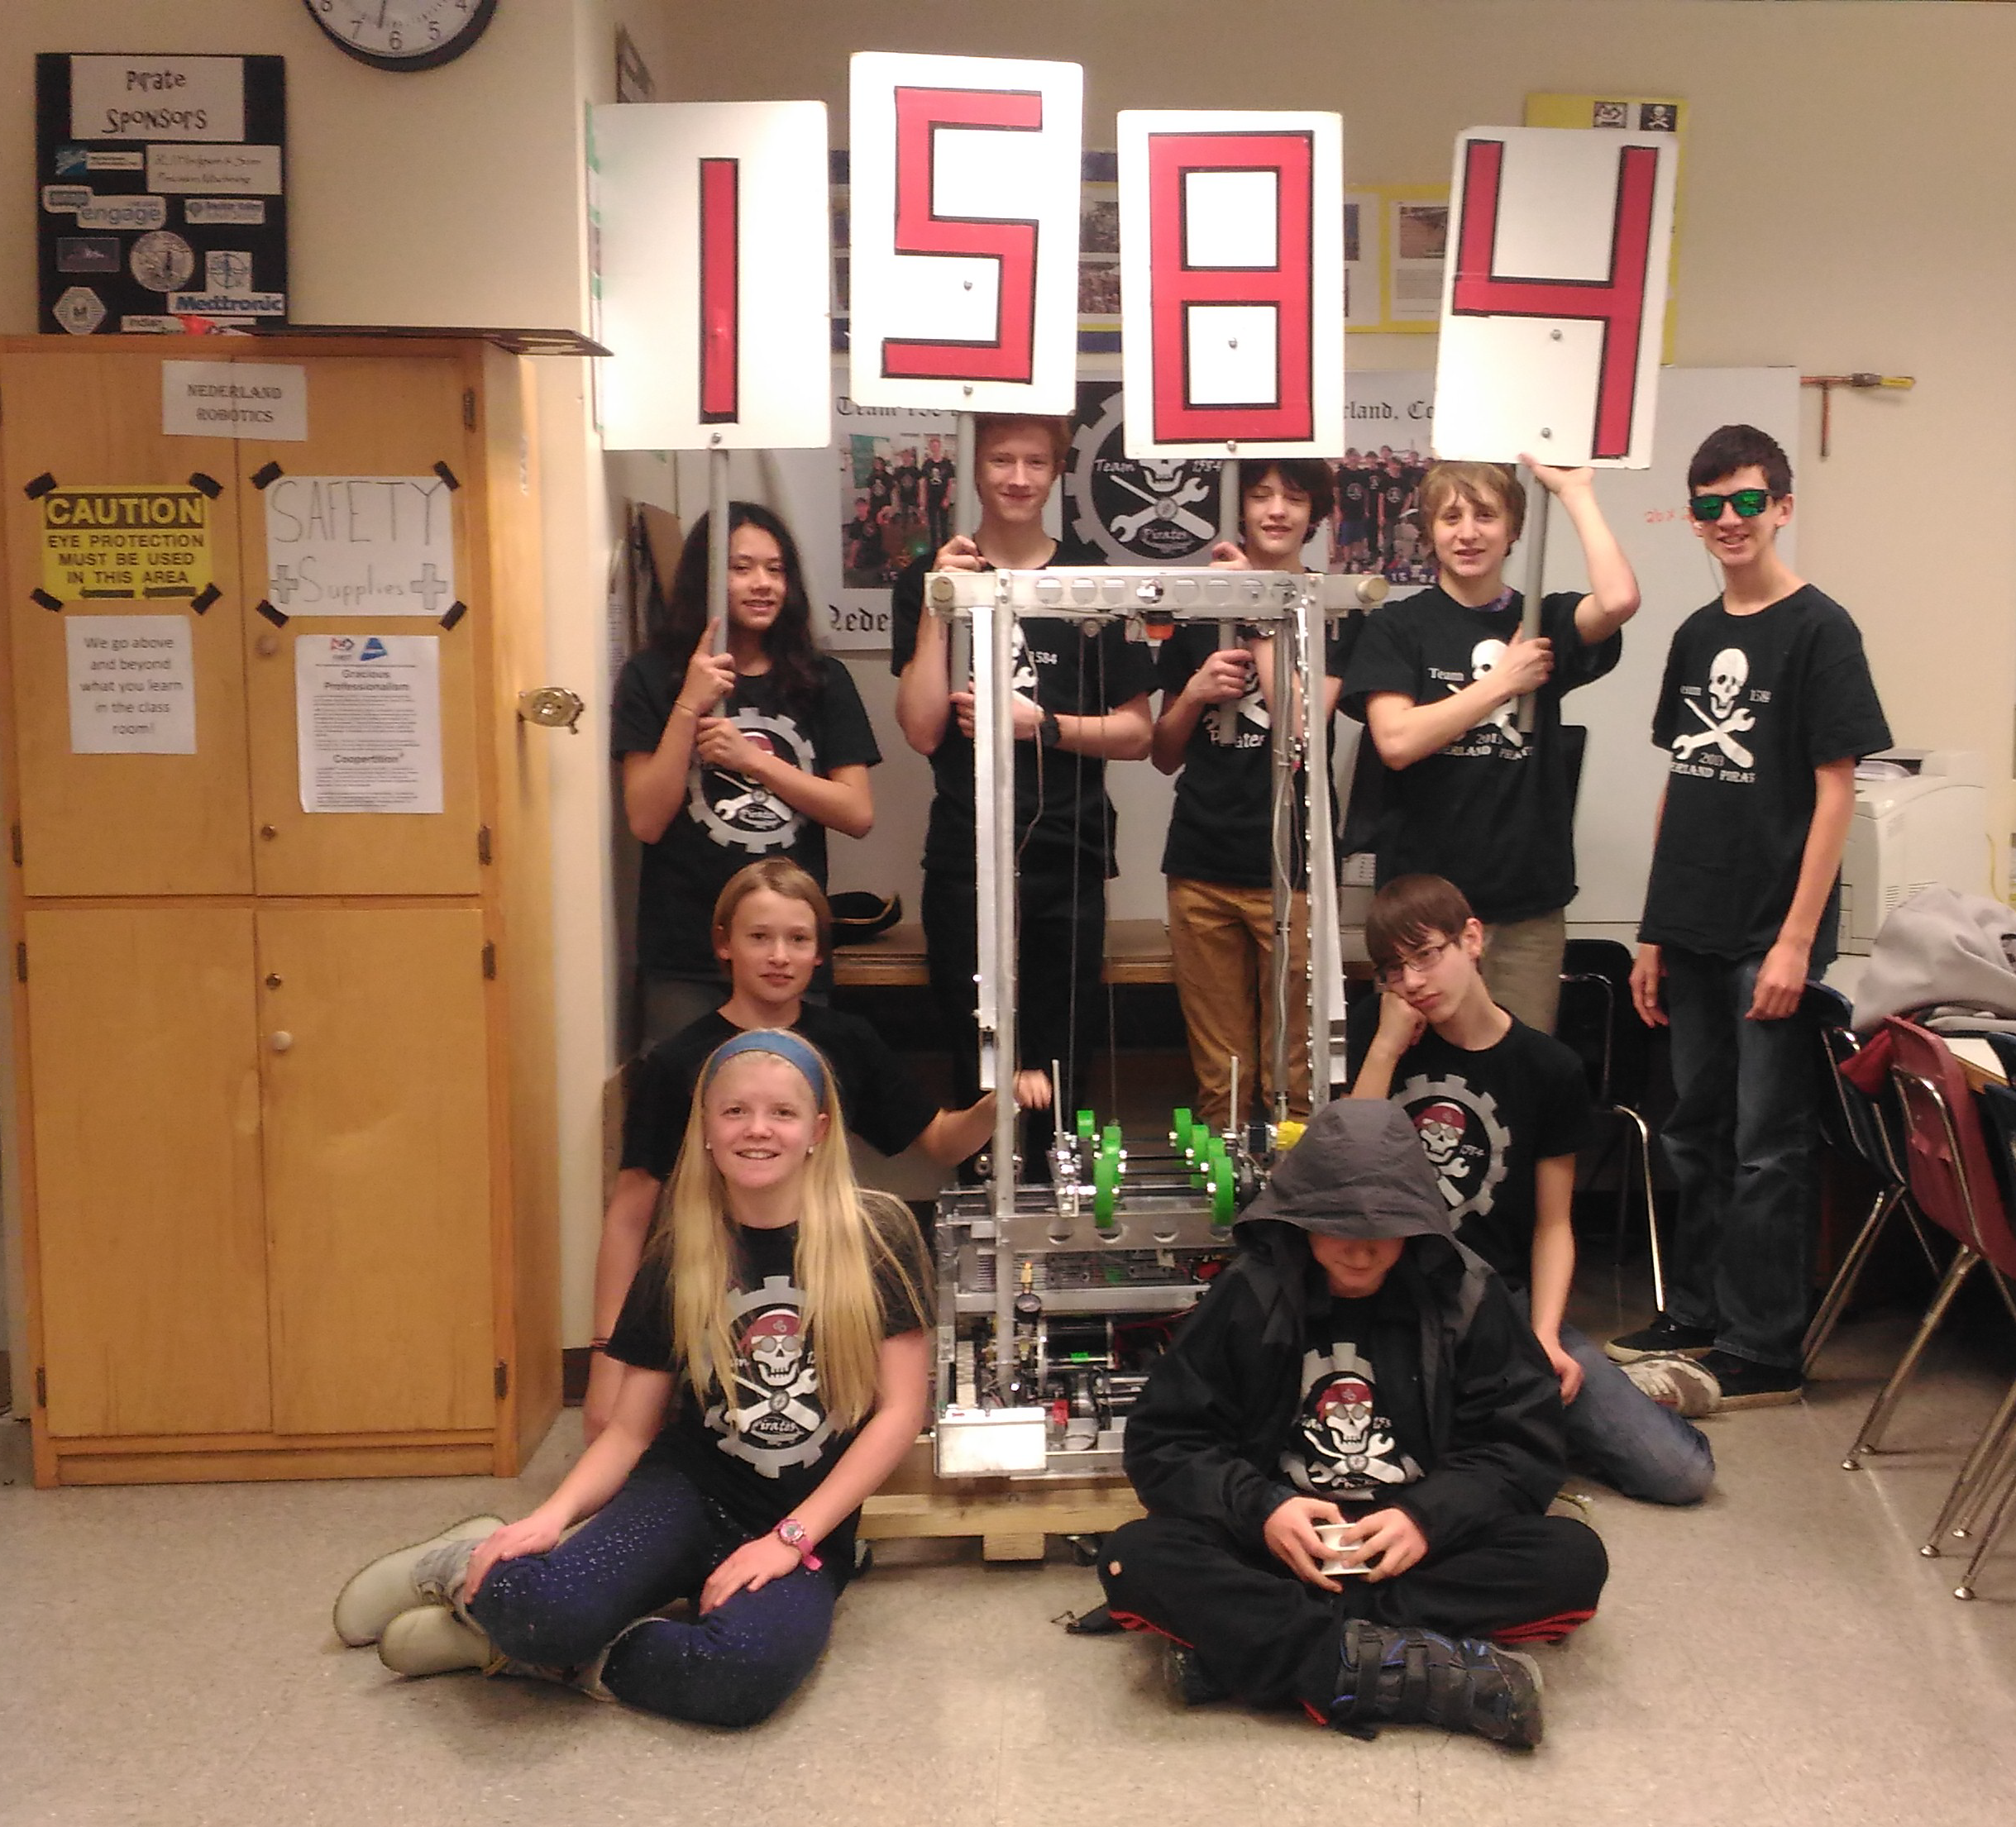 photo: Team1584.png